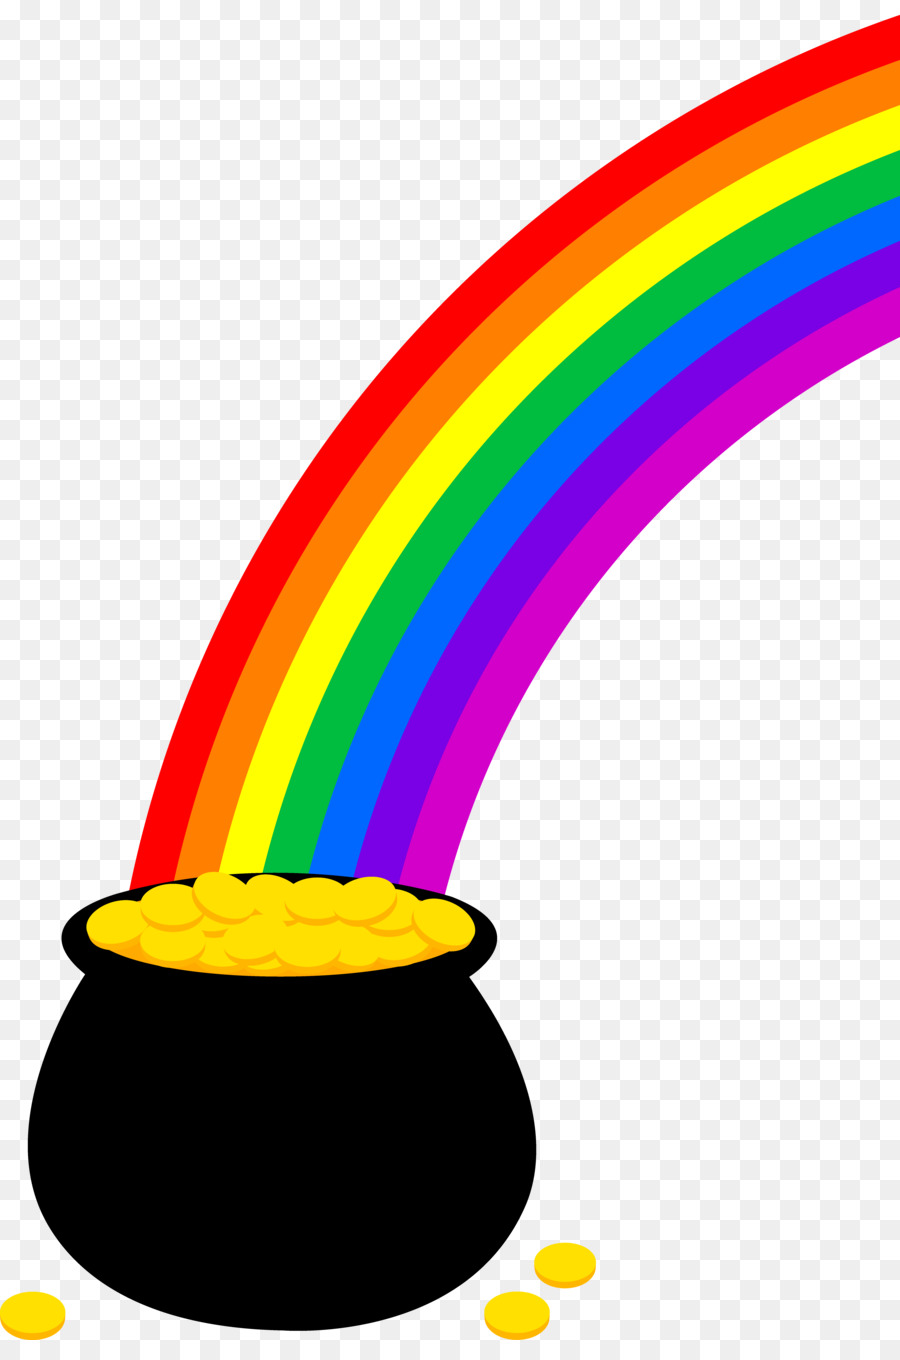 Rainbow And Pot Of Gold Clipart at GetDrawings | Free download